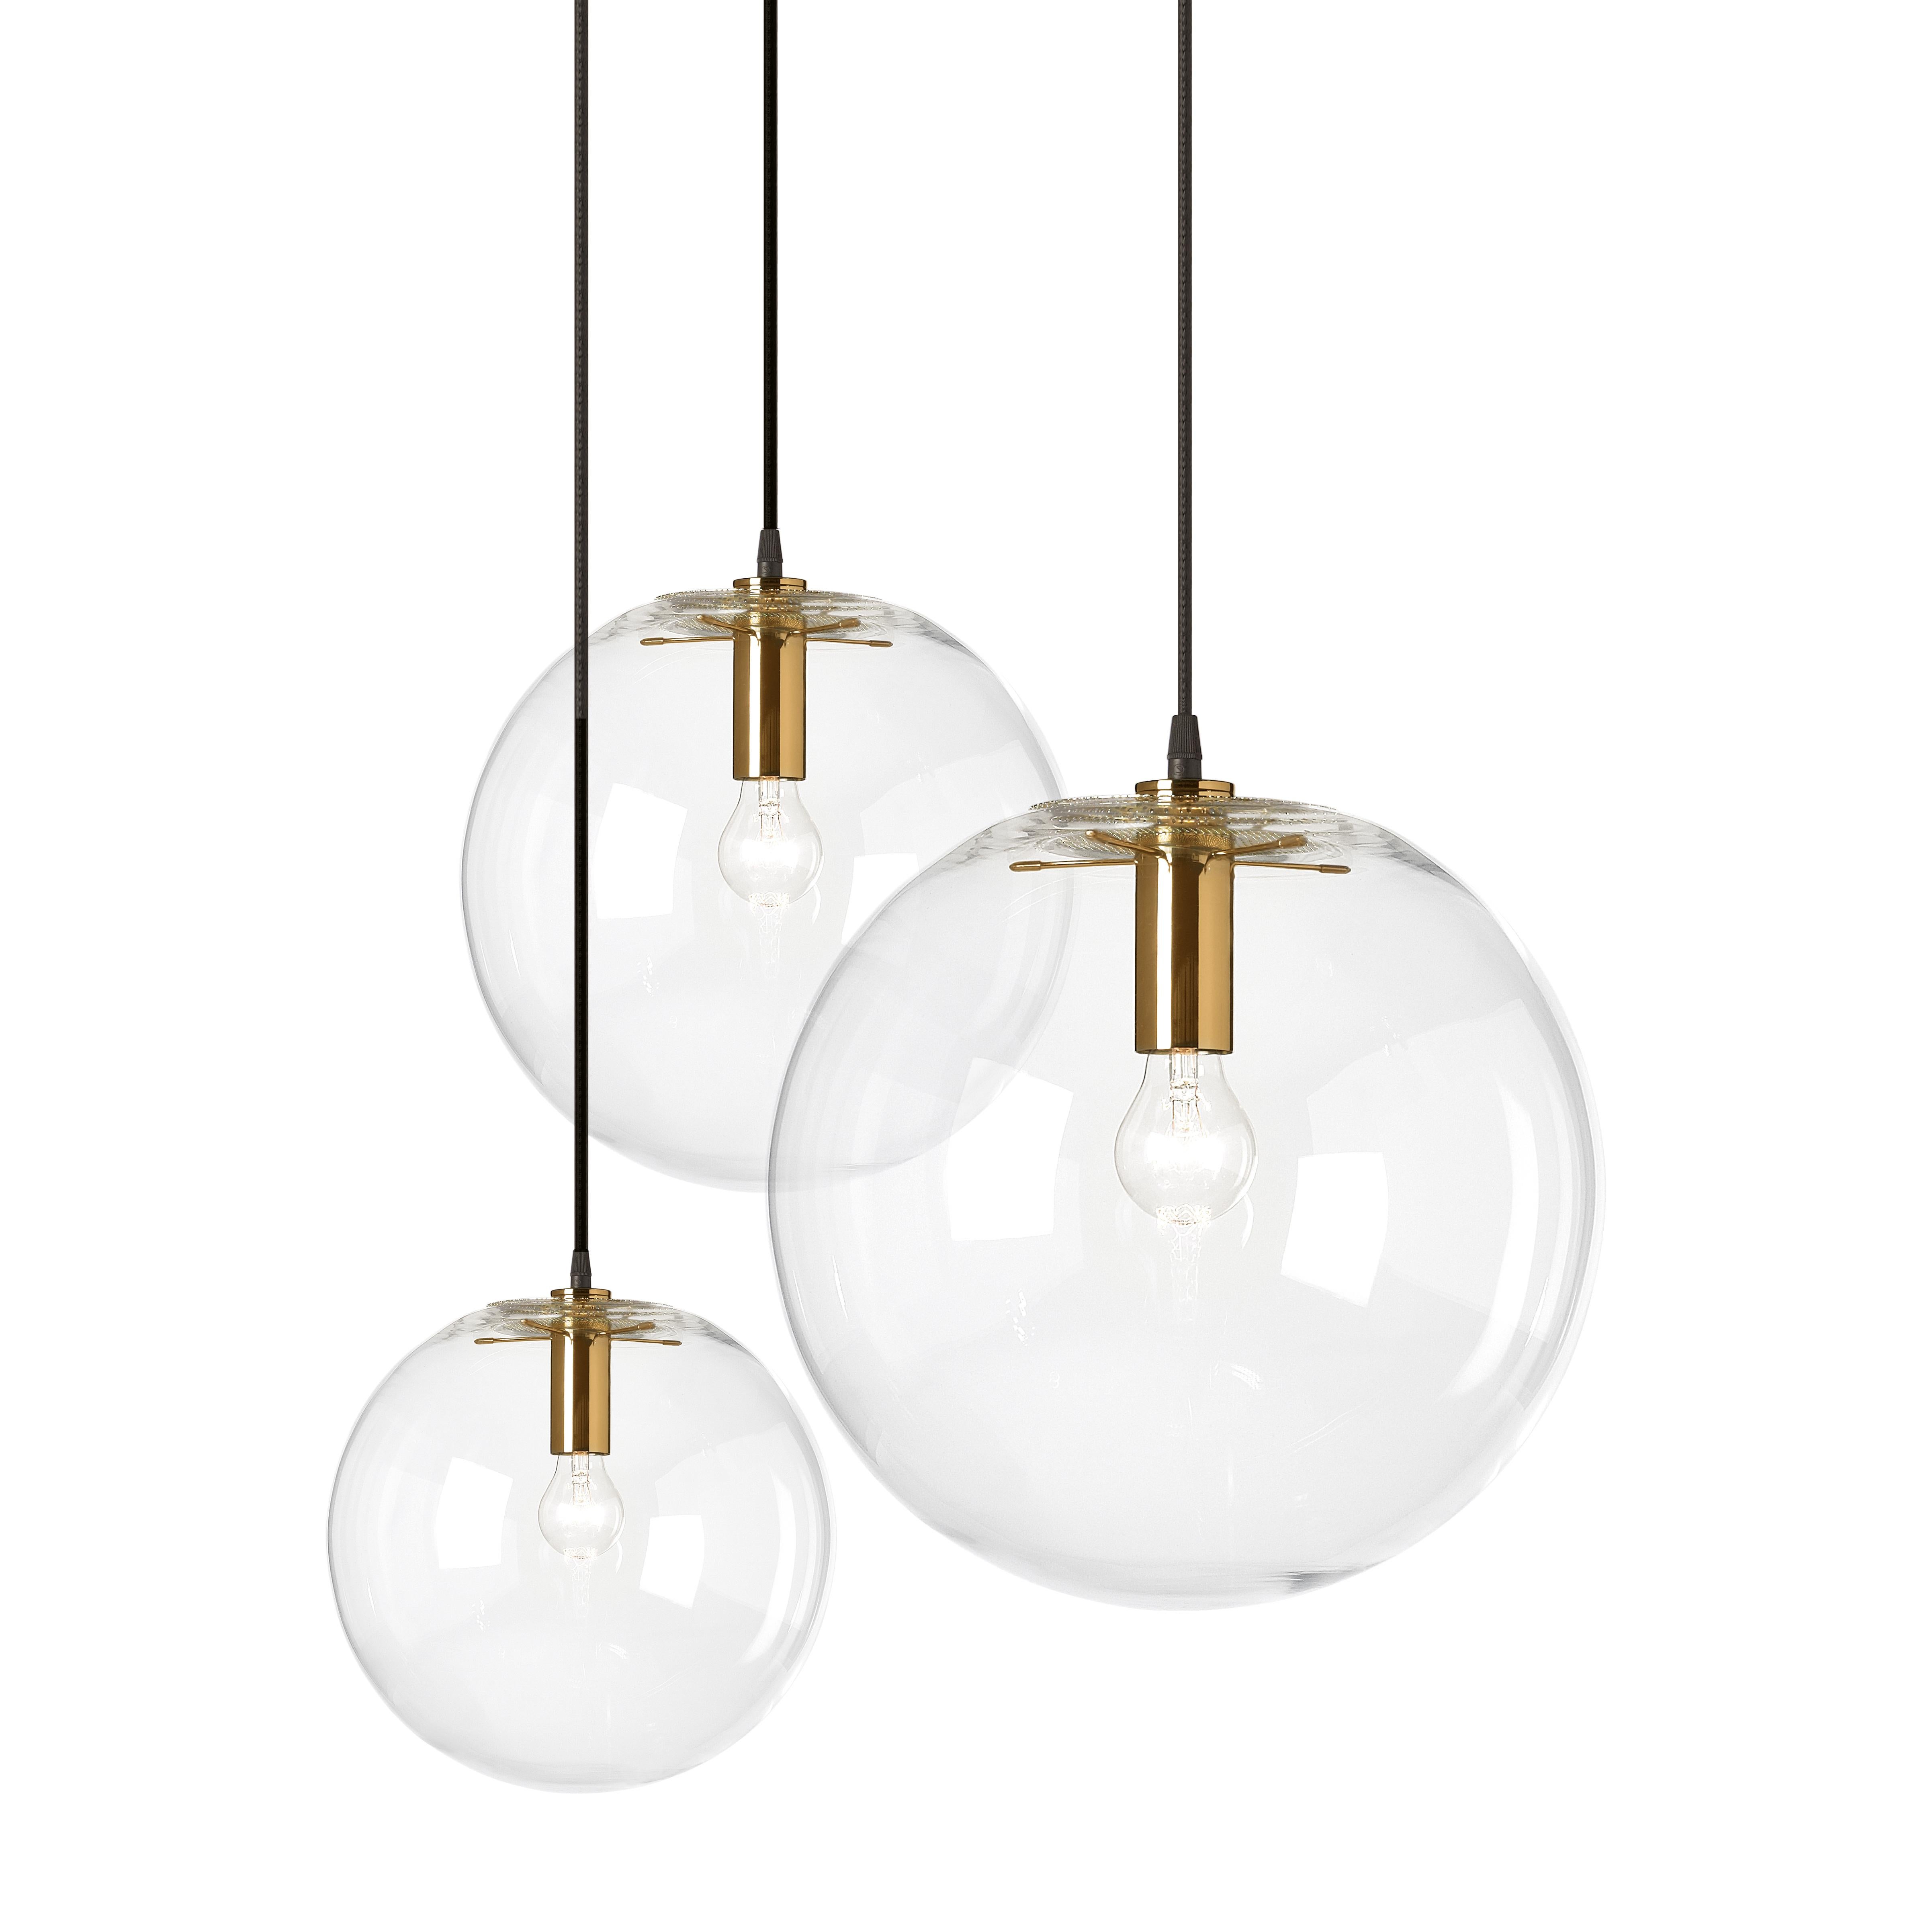 Hand blown clear crystal glass sphere. Centrally suspended by a five-armed light head. Insect protection cover and light head in metal, brass-plated. Black fabric covered wire.

UL version 110 V:
Max. 60 W / 110 V
Socket E 26

Dimensions: W 35